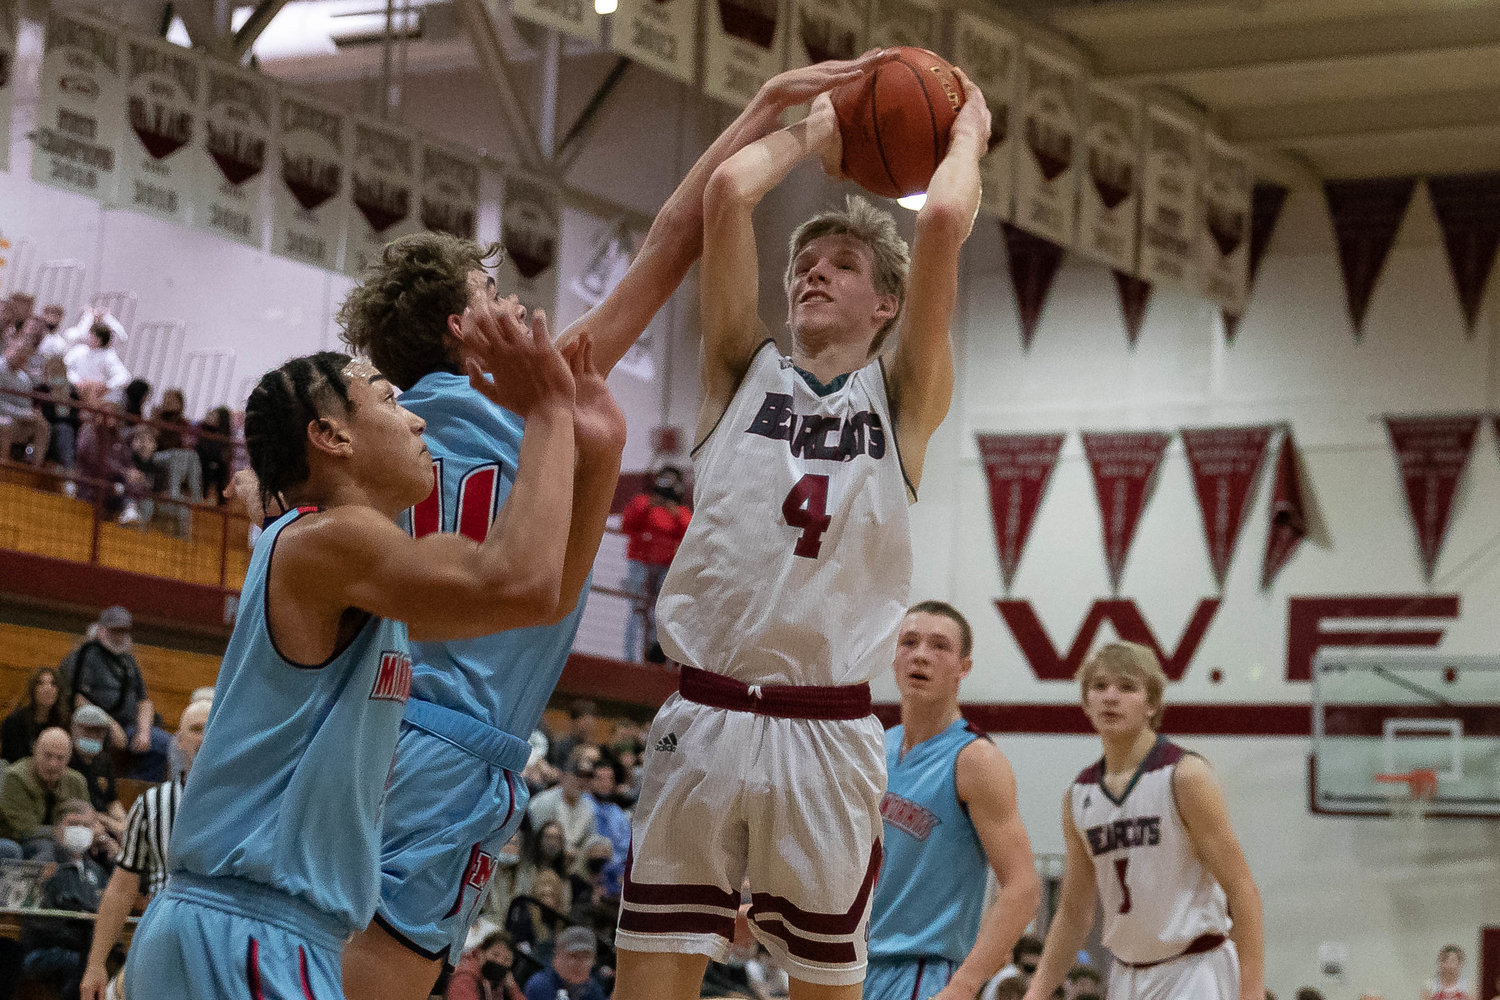 Bearcat guard Evan Tornow rises for a contested jumper in a loss to Mark Morris in the opening round of the 2A District IV playoffs in Chehalis Feb. 12.